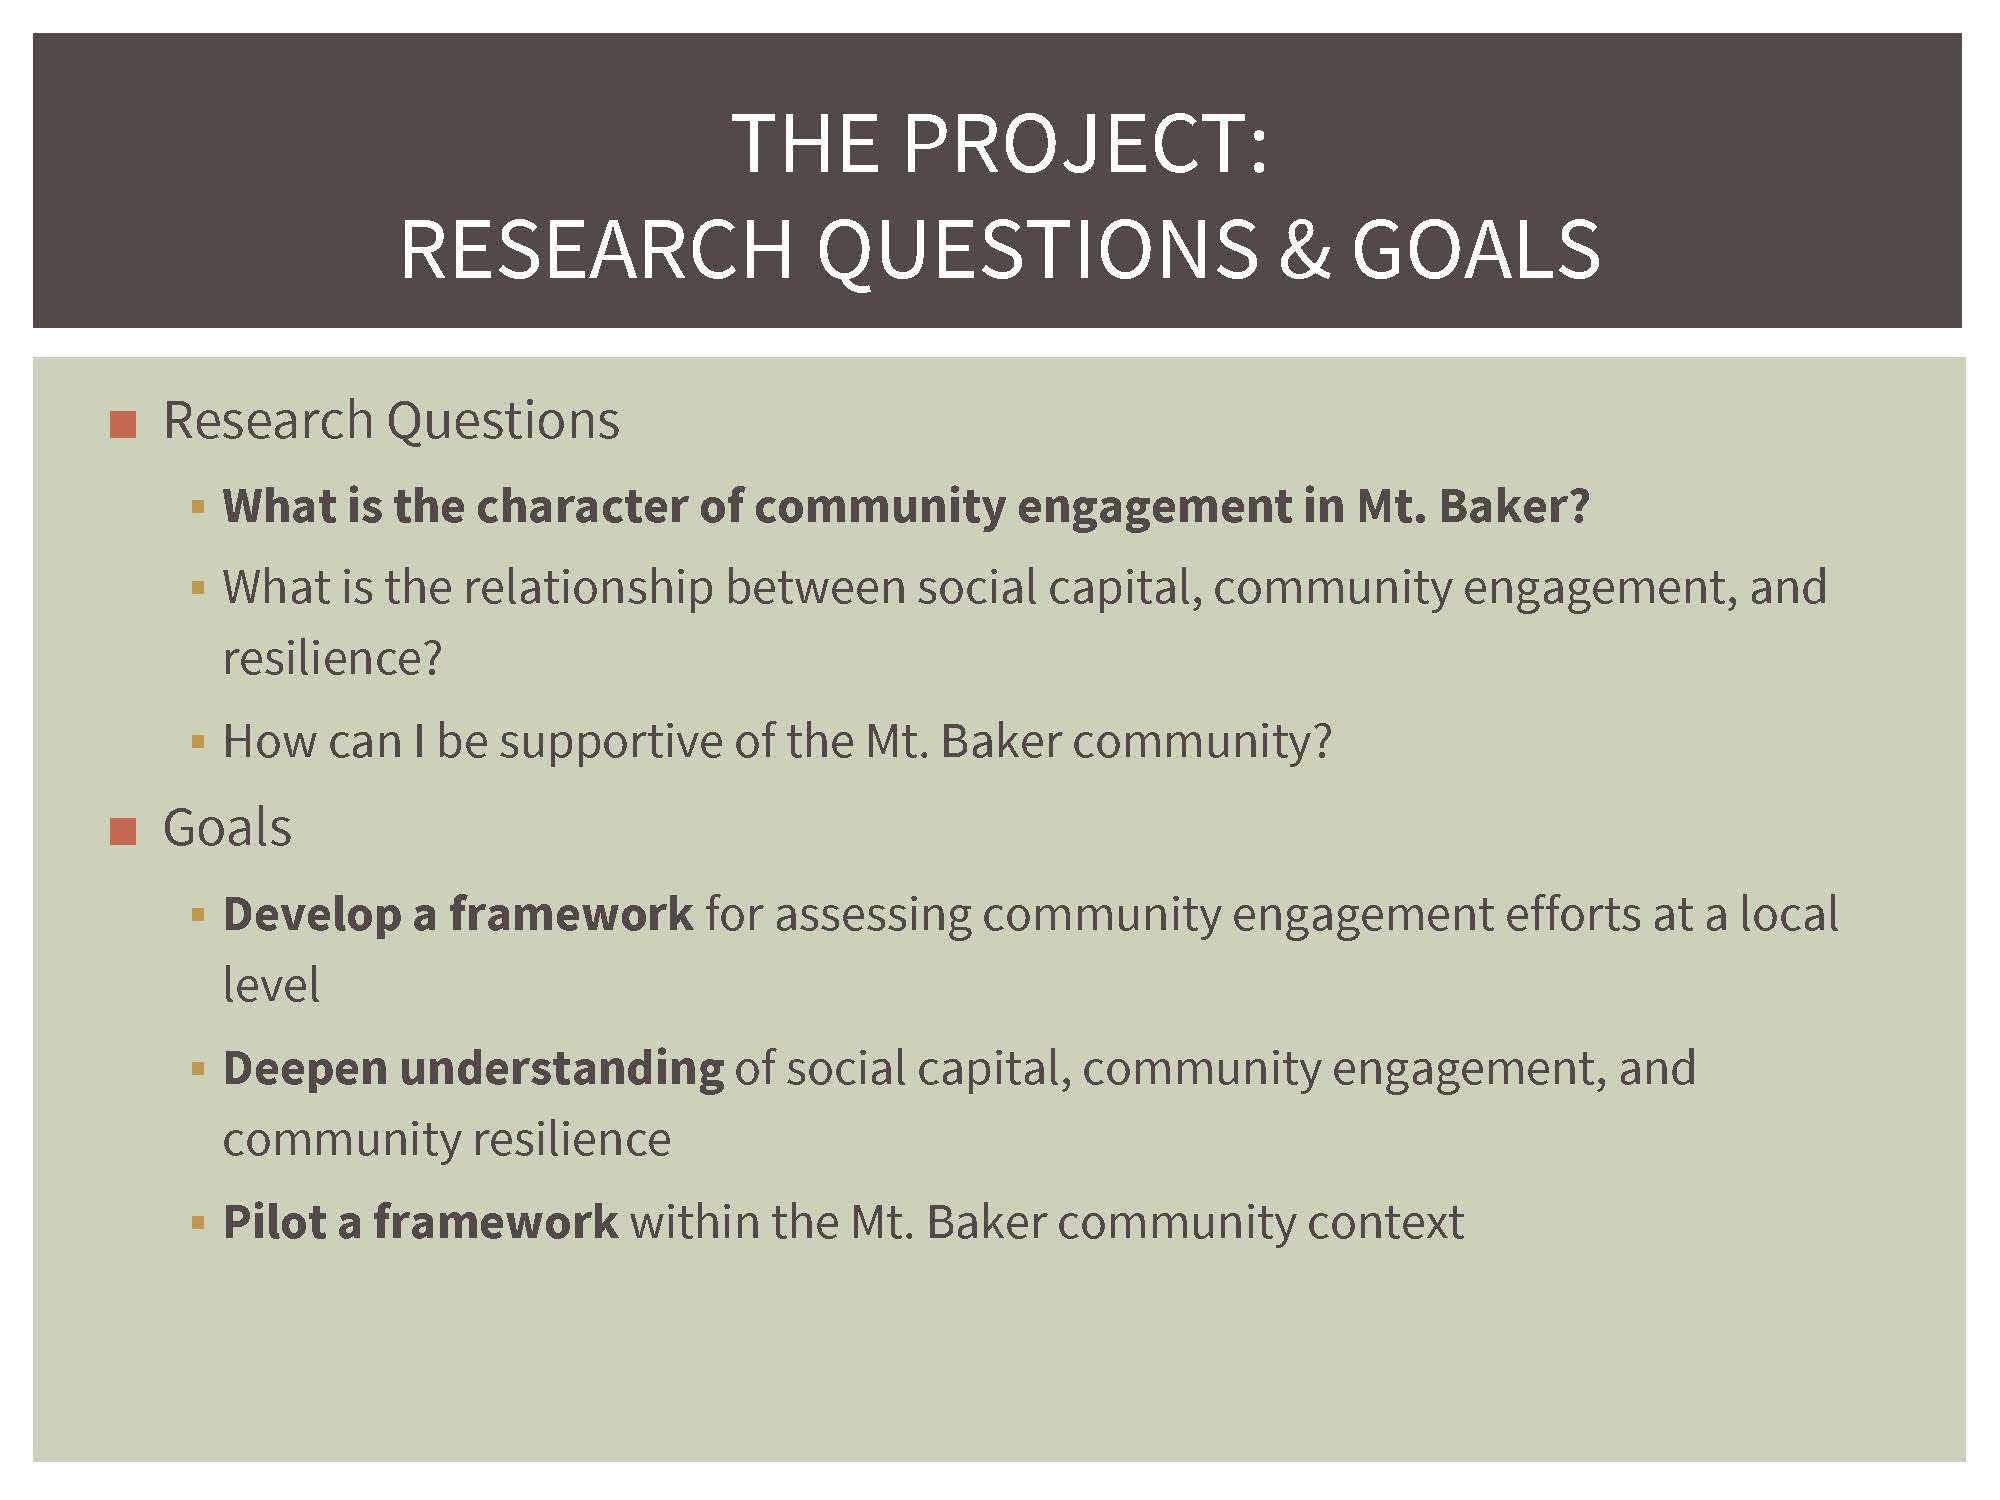 Chaffee_Community Engagement in Mt Baker_Page_03